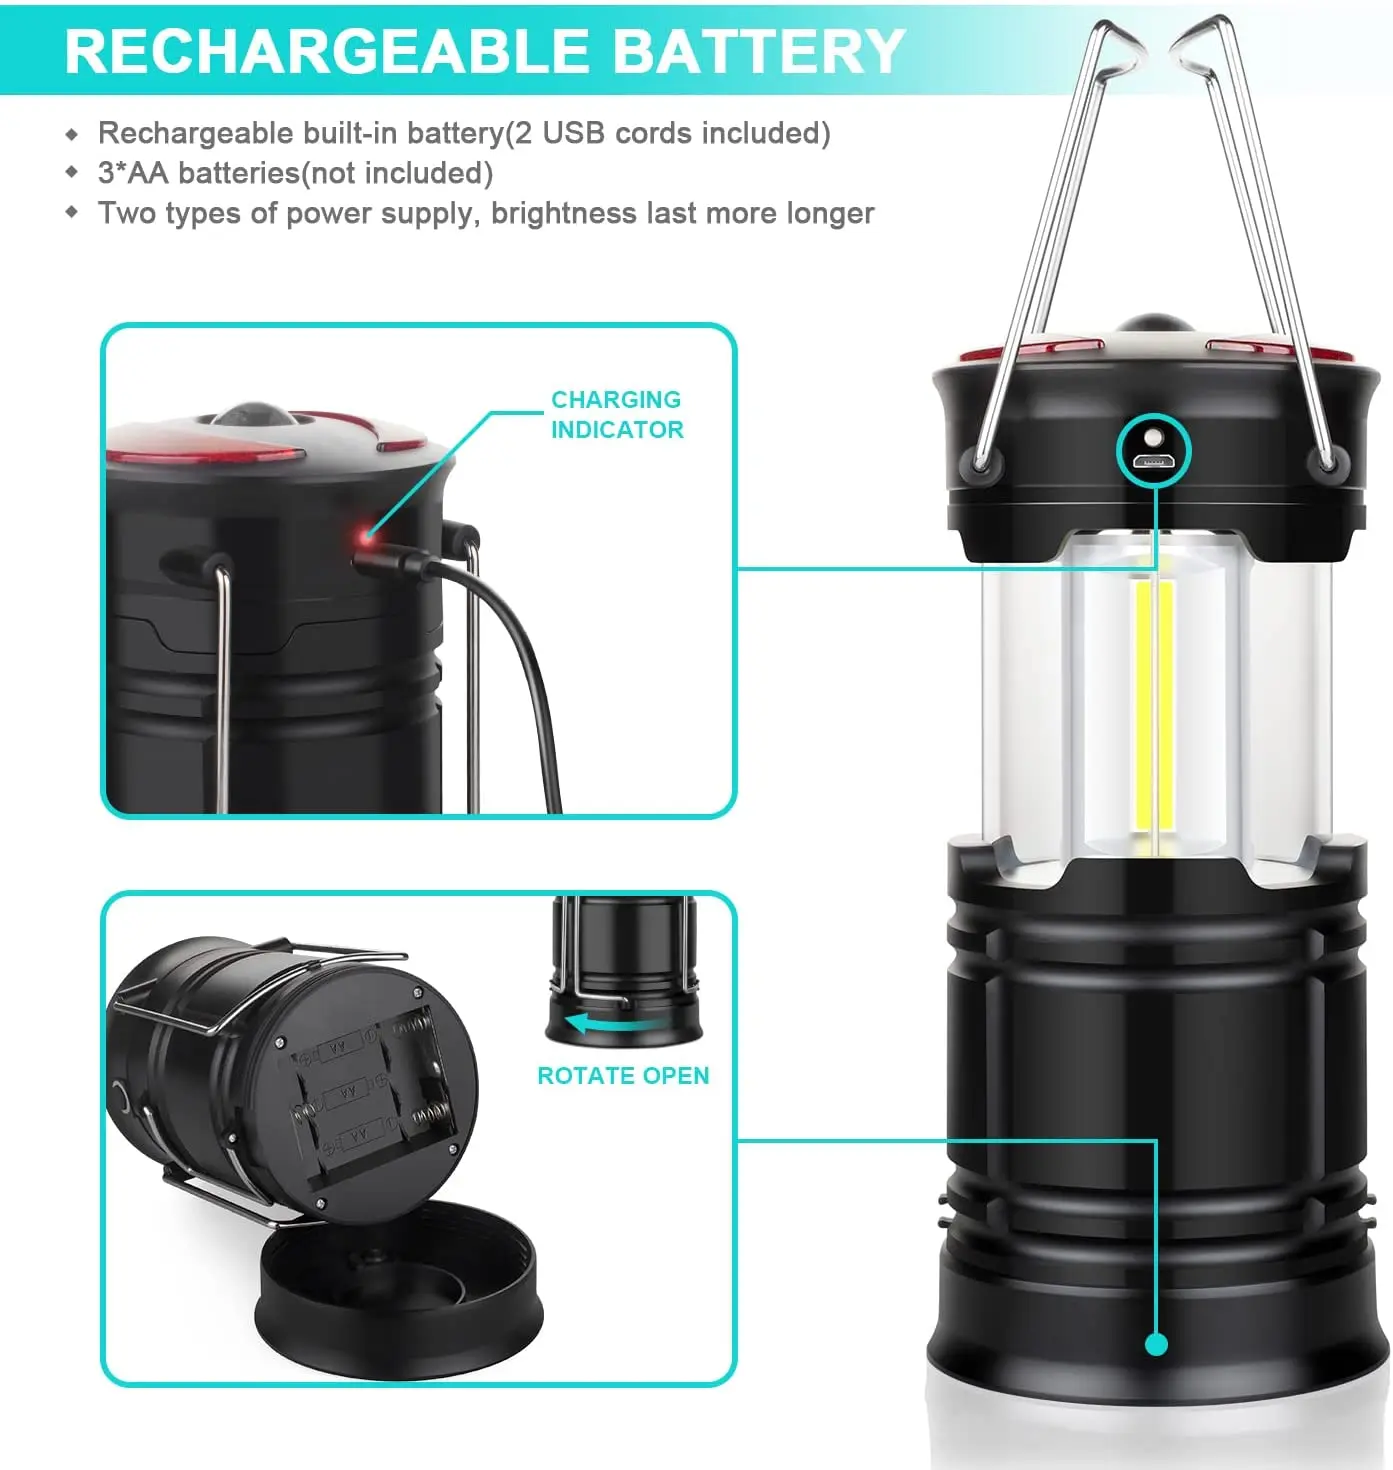 https://ae01.alicdn.com/kf/S8a2e8151c9a34dec857a0761bd36b715n/Camping-Lanterns-Rechargeable-and-Battery-Powered-LED-Lanterns-Hurricane-Lights-with-Flashlight-and-Magnet-Base.jpg